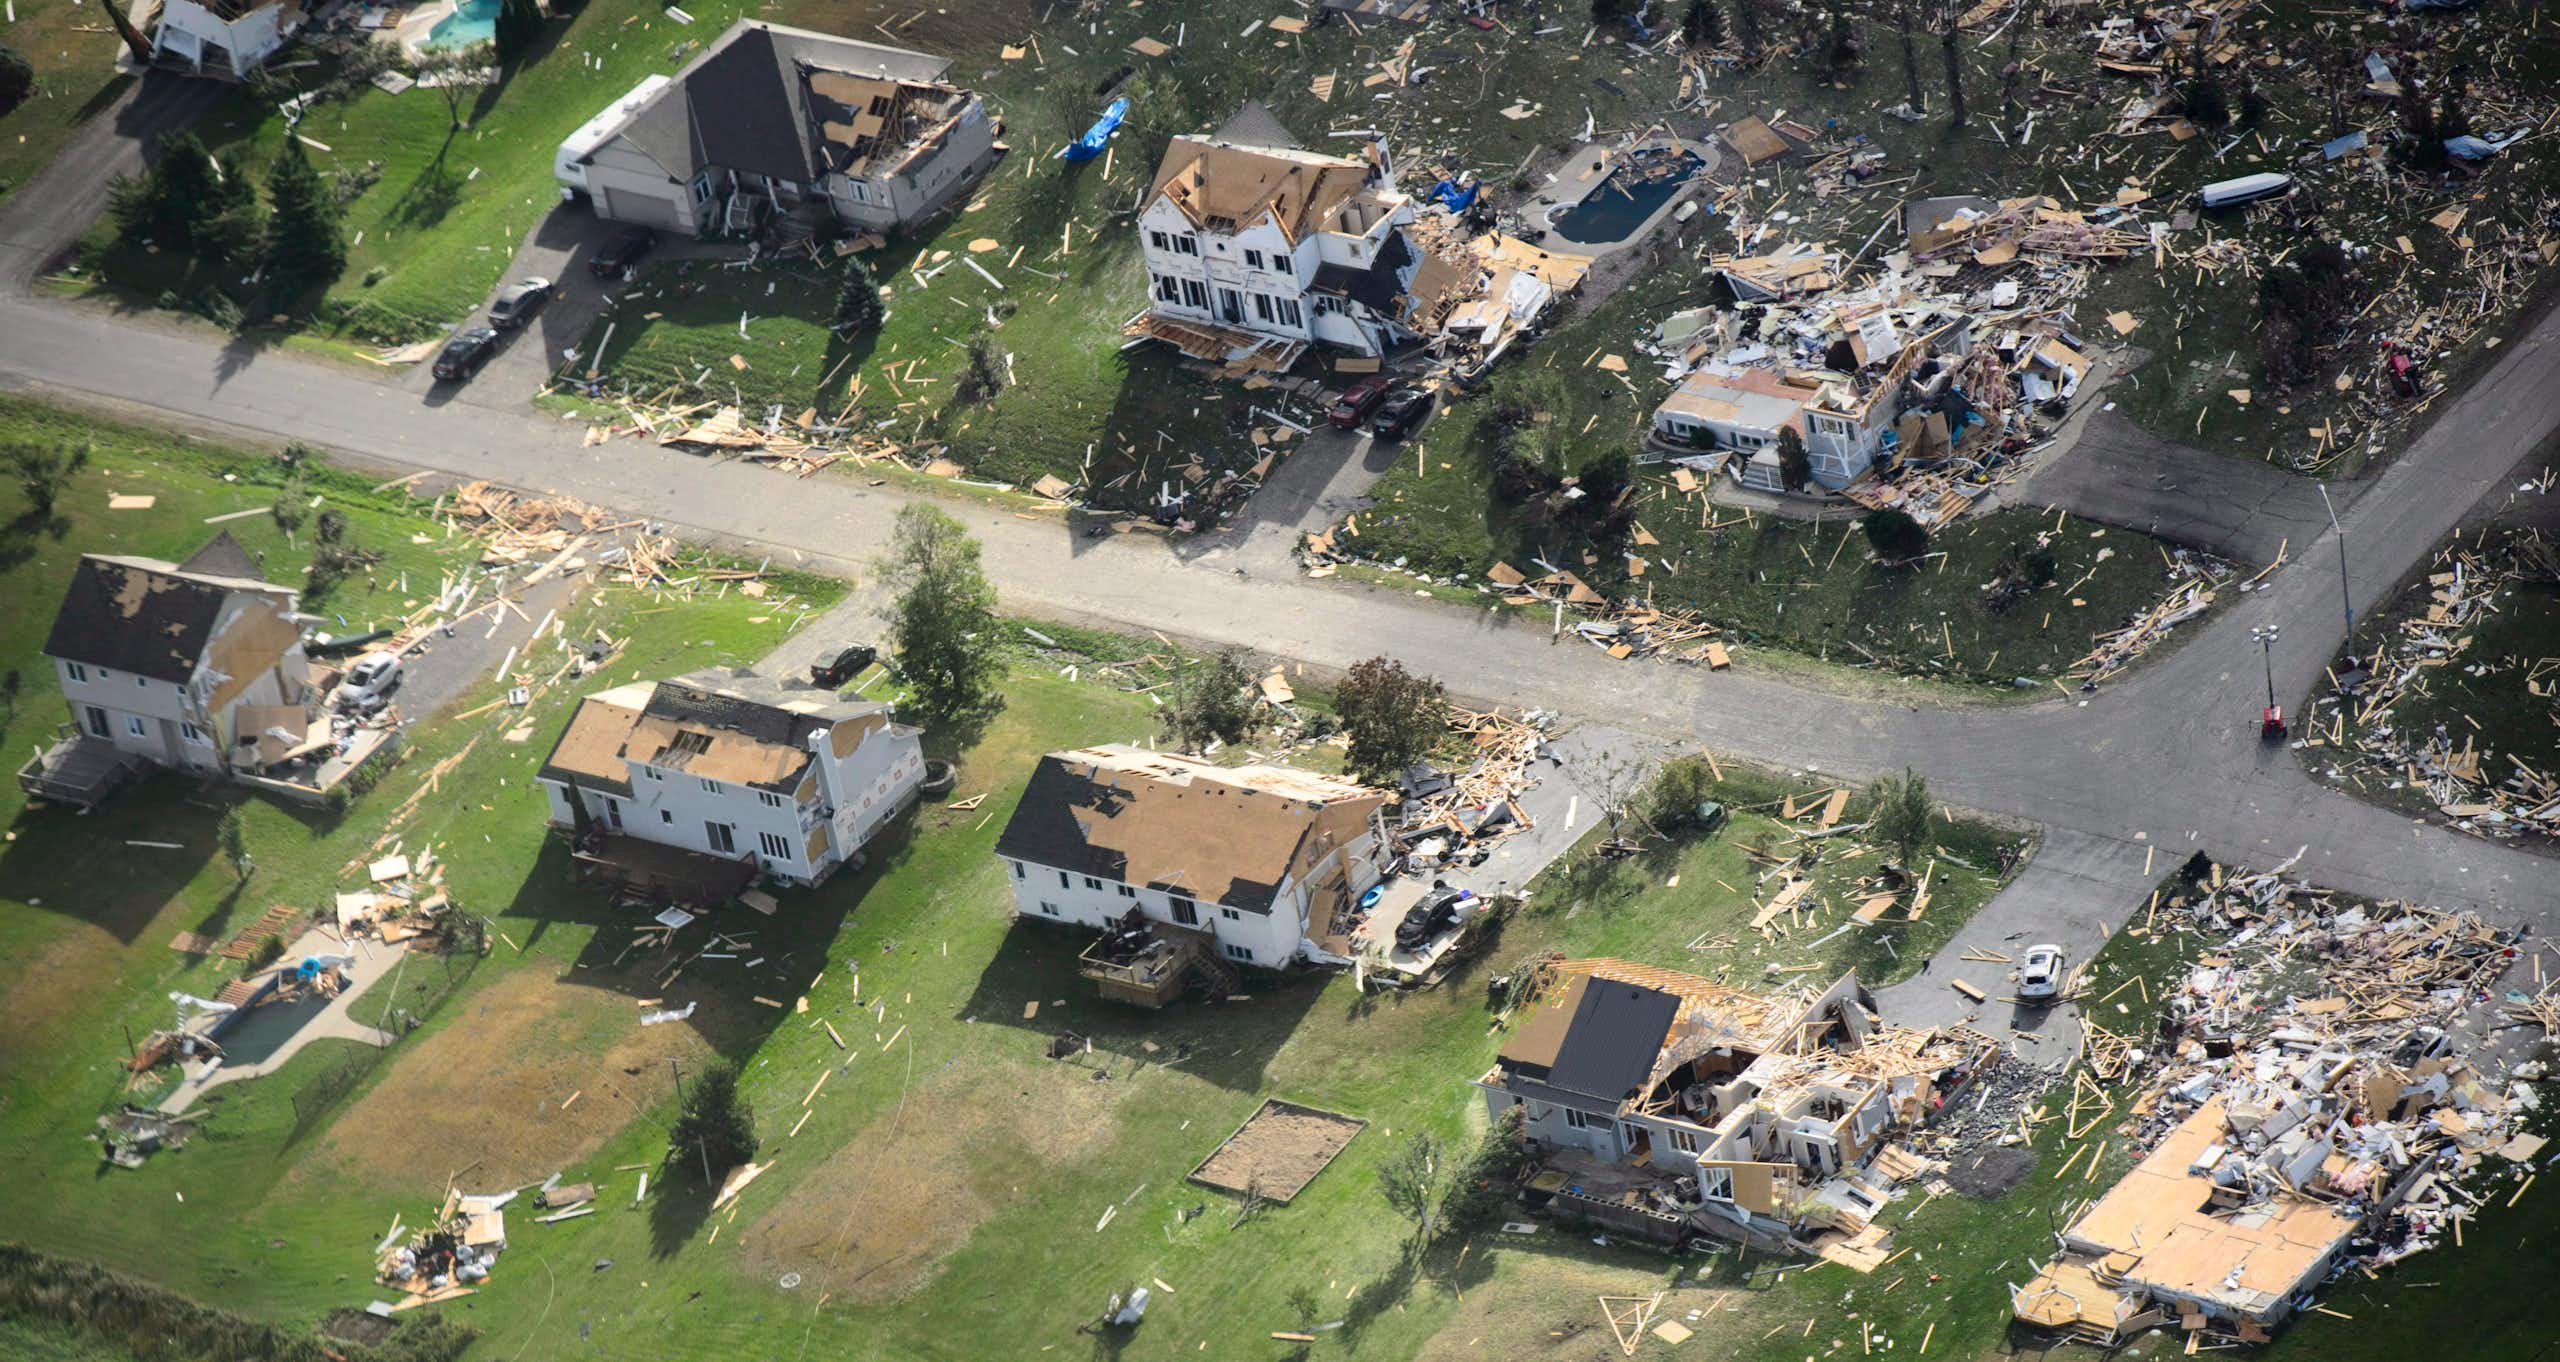 An aerial view of destroyed houses.